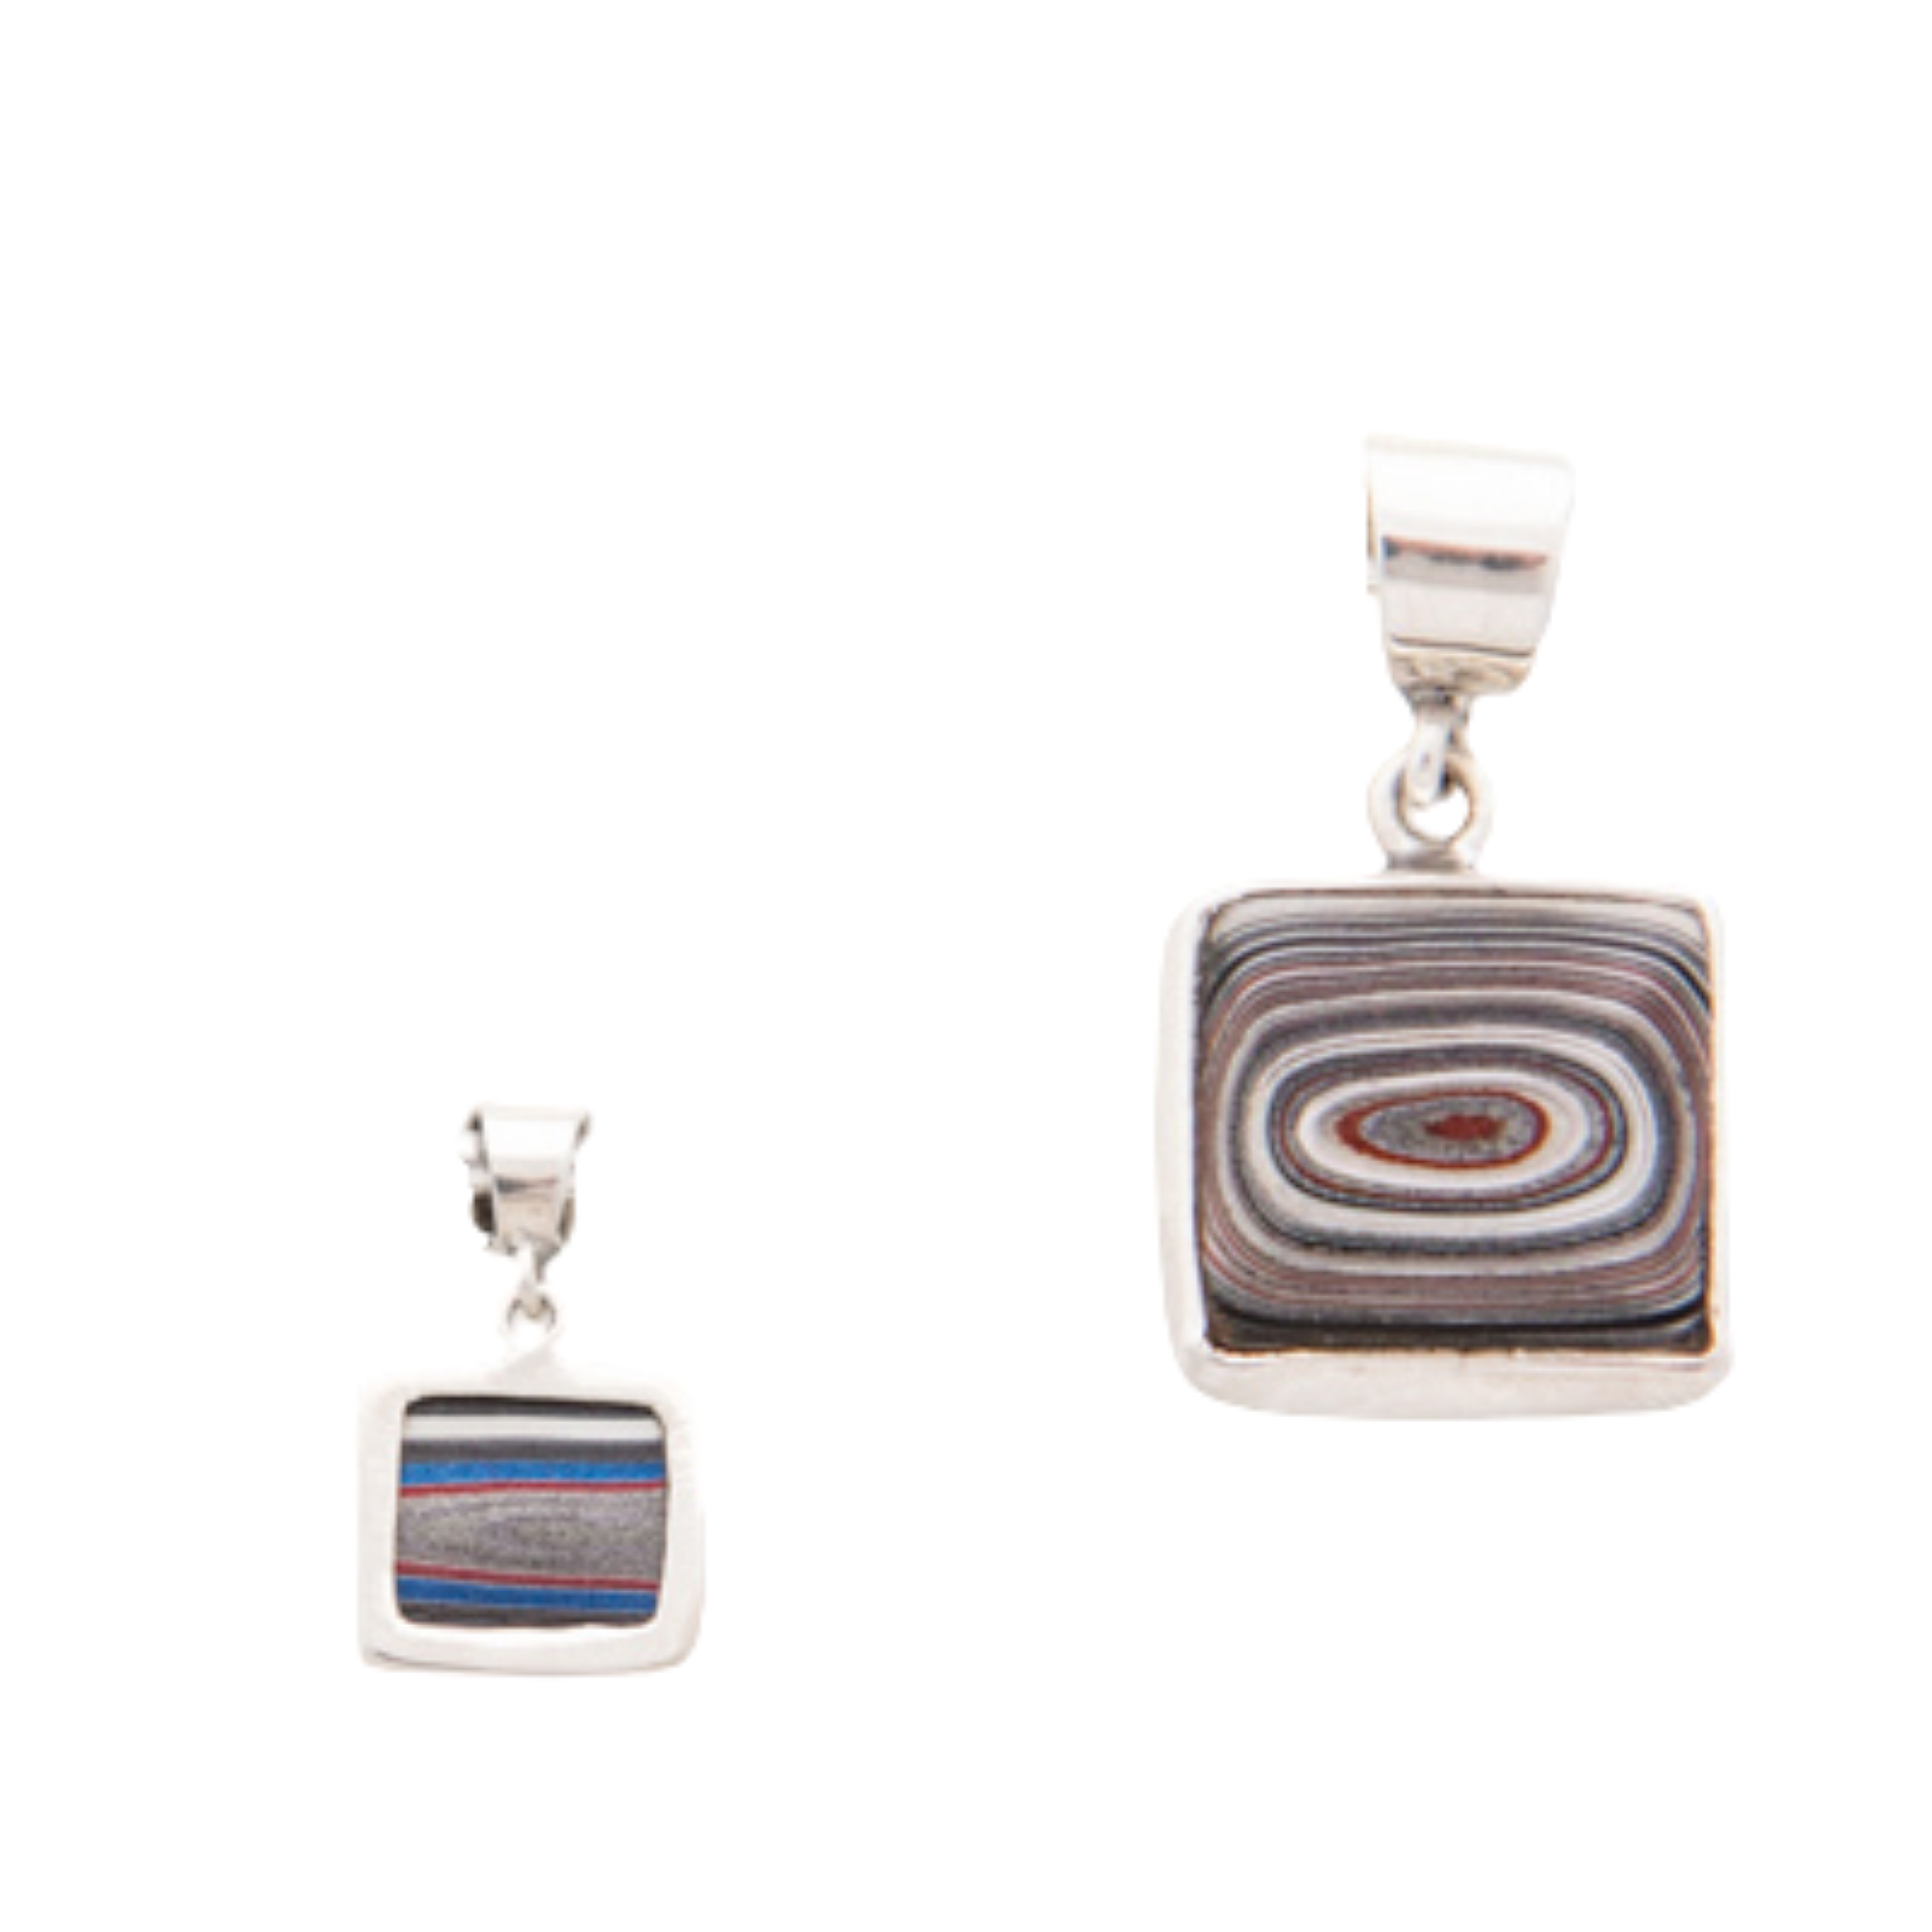 Fordite Pendant in Sterling Silver Siesta Silver Jewelry Detroit Agate fits on Pandora type bracelet or bangle